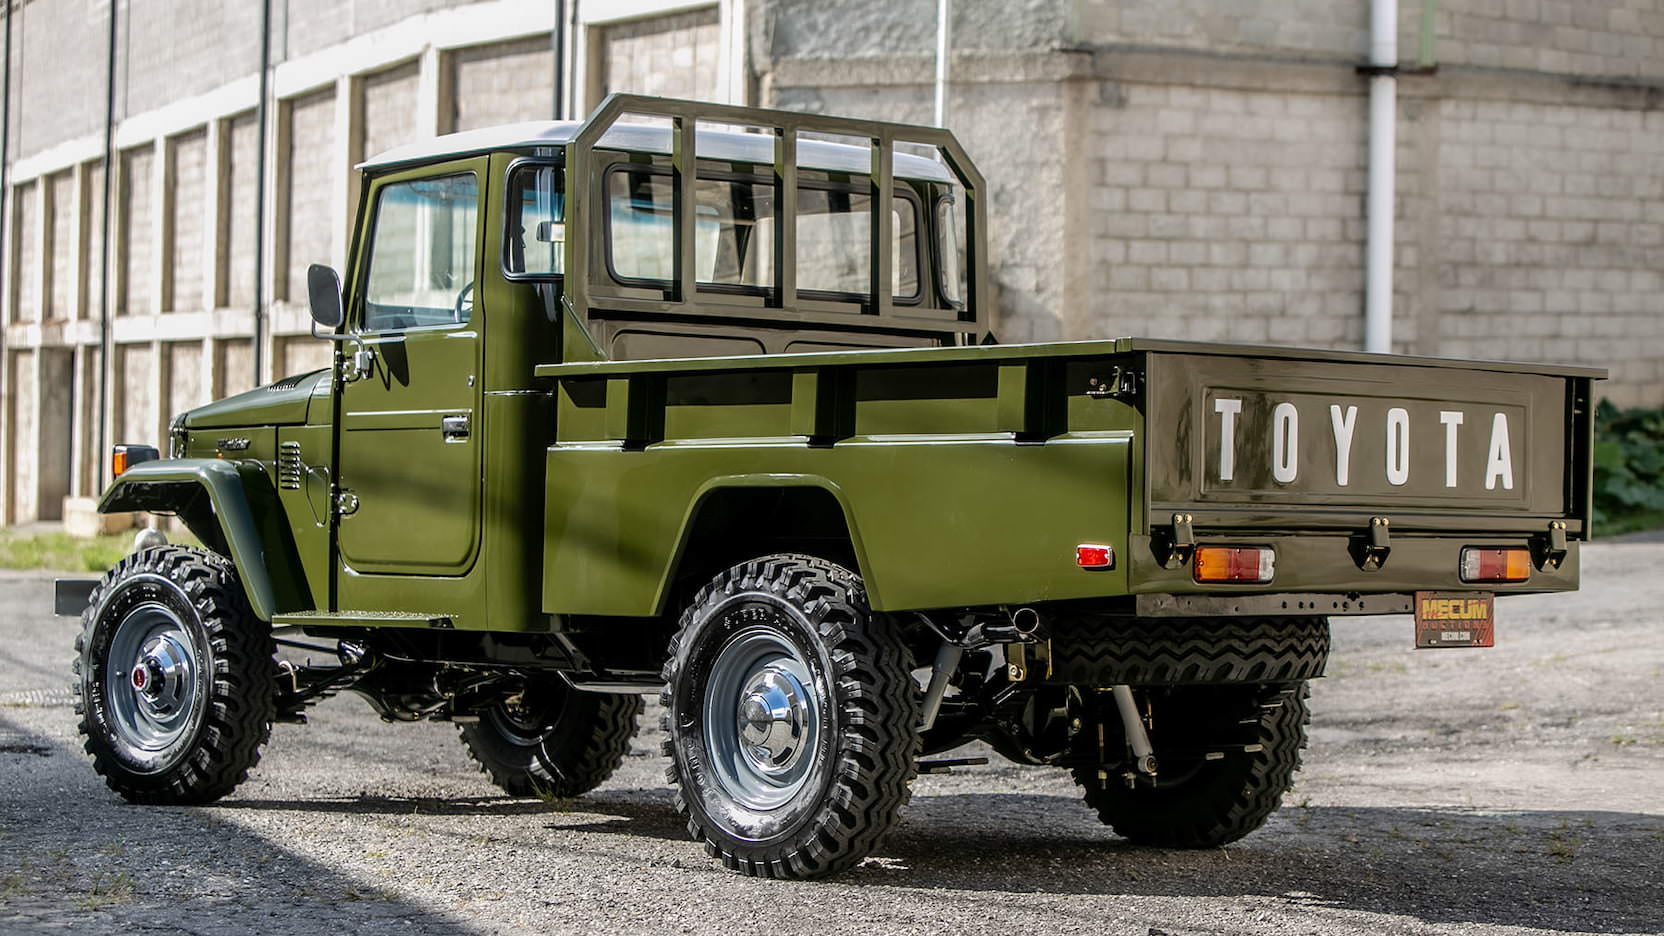 kortademigheid levering aan huis Sentimenteel The Perfect Land Cruiser? This Is A 1983 Toyota FJ45 Land Cruiser Pickup